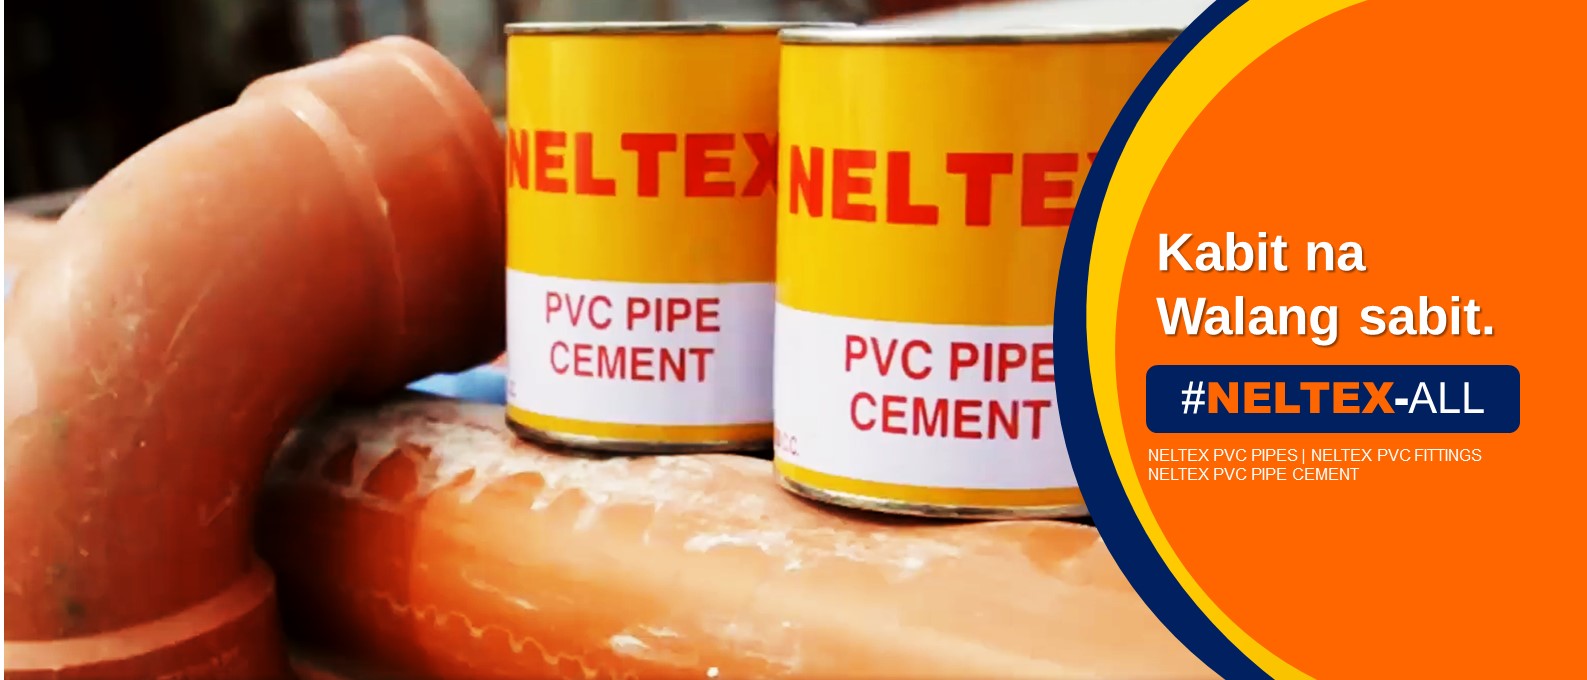 Chemical Welding: The Secret to Kabit na Walang Sabit PVC pipes and fitting Connections